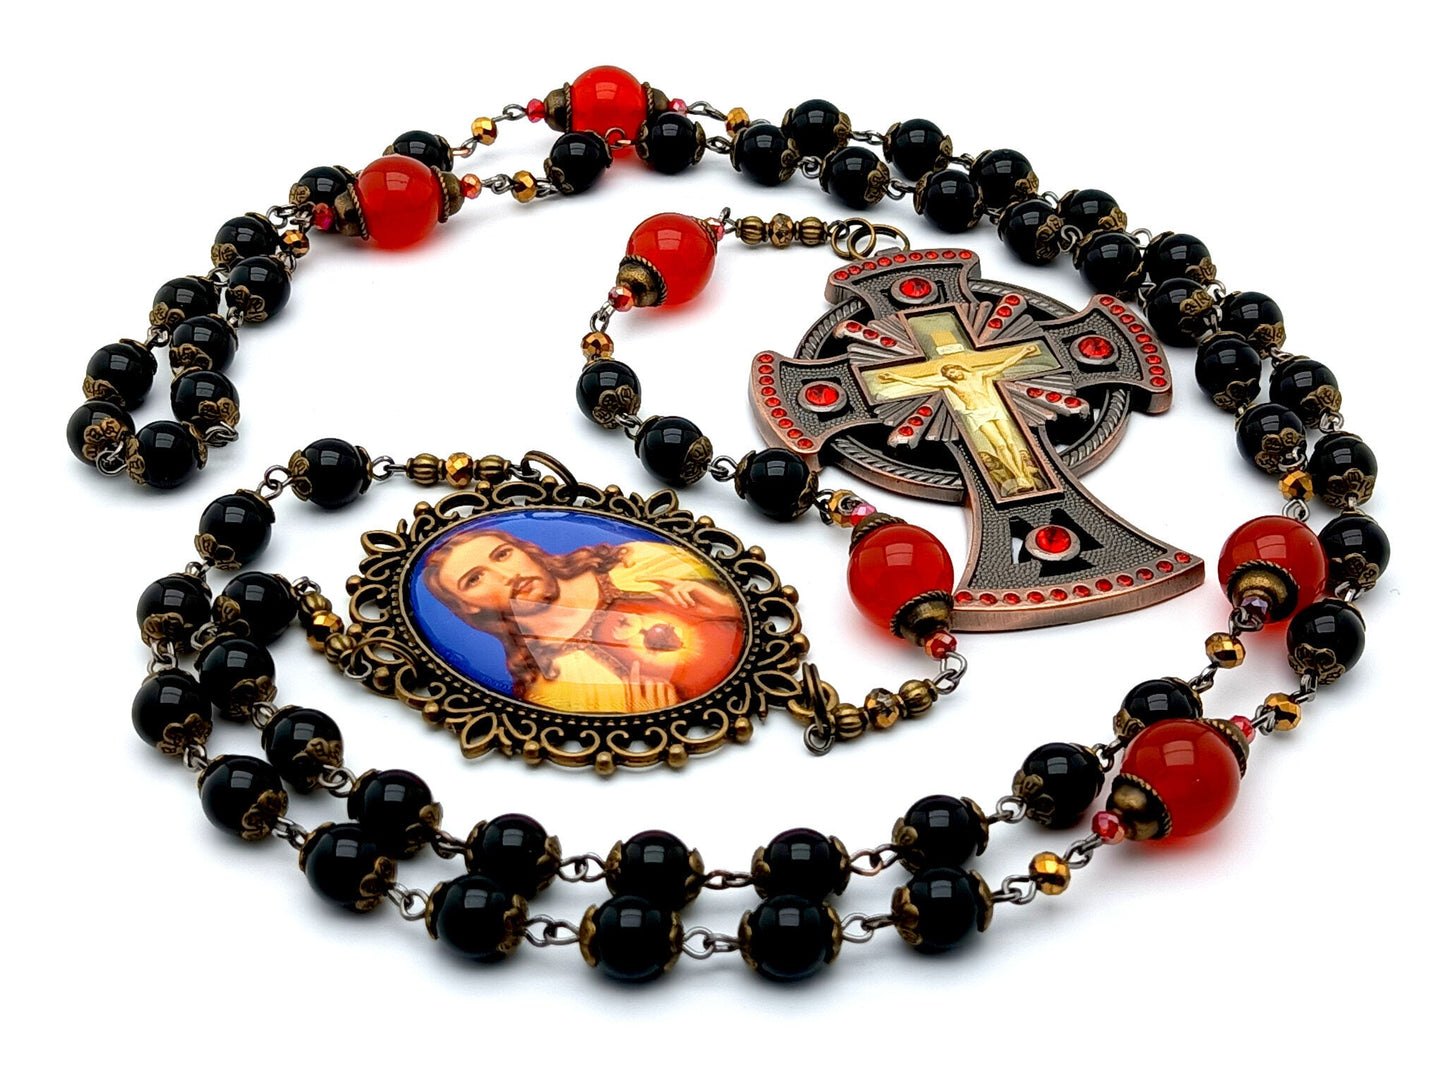 Vintage Sacred Heart of Jesus unique rosary beads with onyx and red jasper gemstone beads, large picture corpus crucifix with red crystal details and picture centre medal.